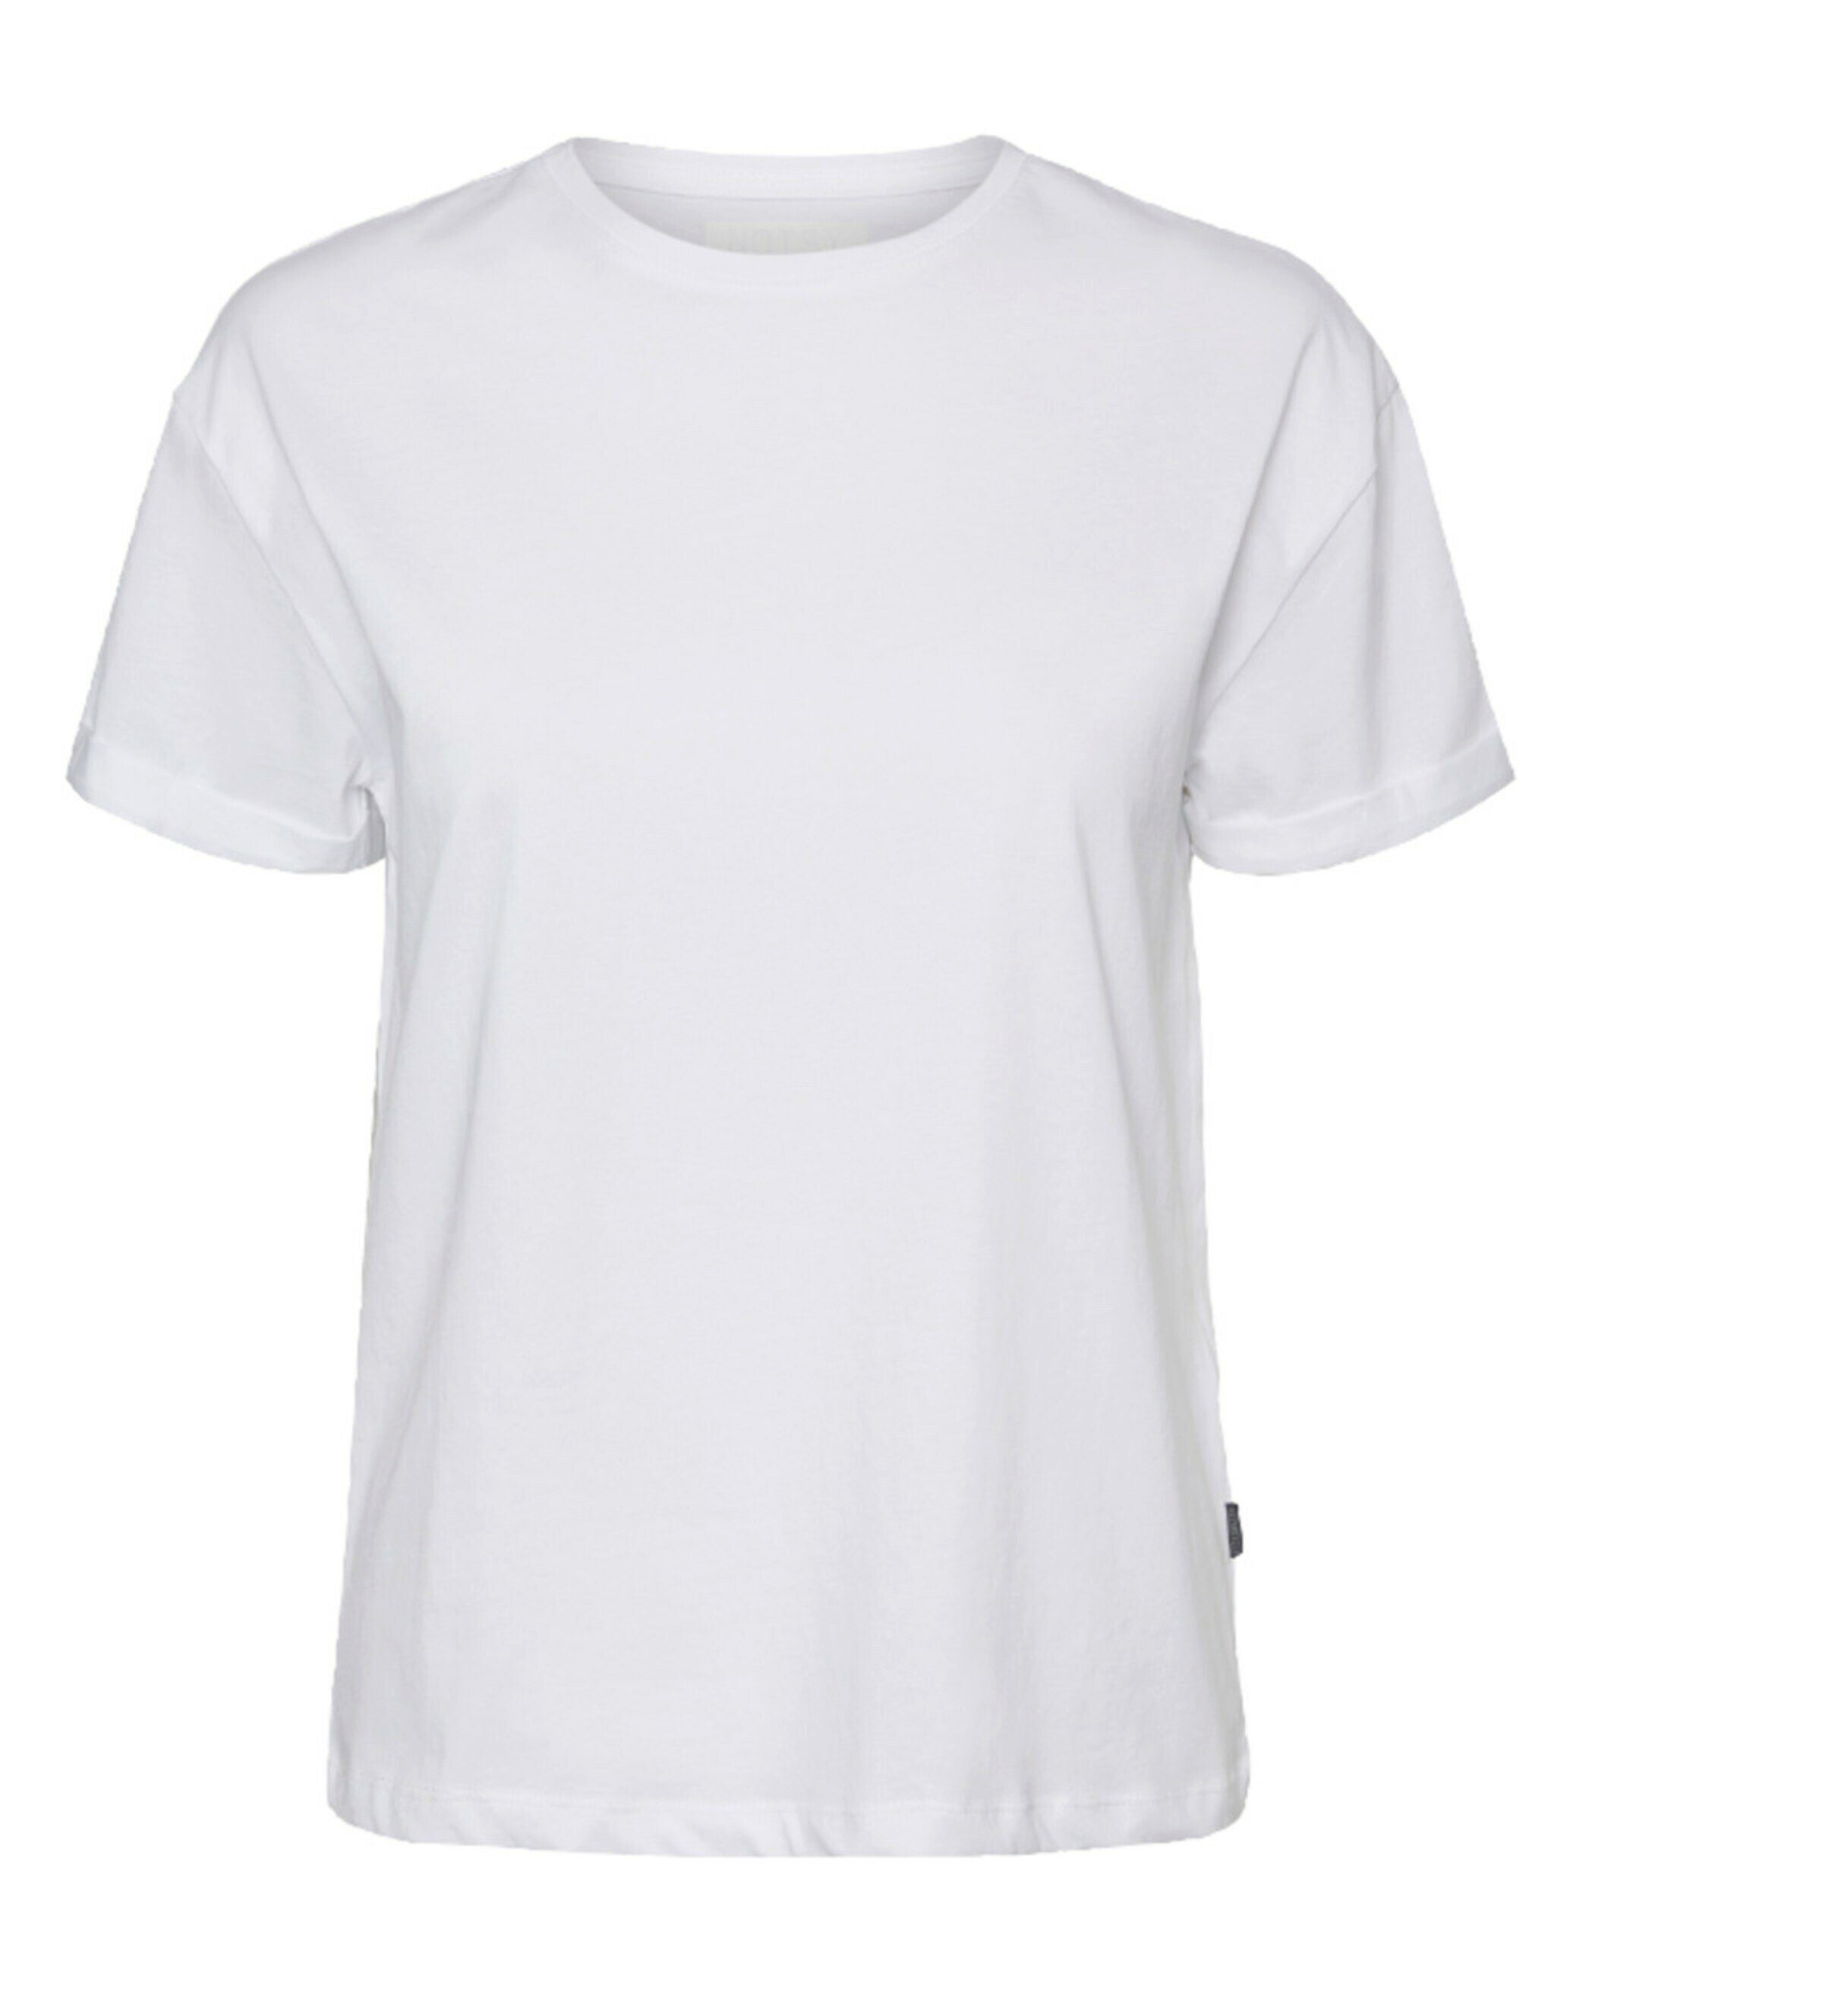 Details, (1-tlg) Detail may Plain/ohne Weiteres White T-Shirt Noisy Bright Brandy